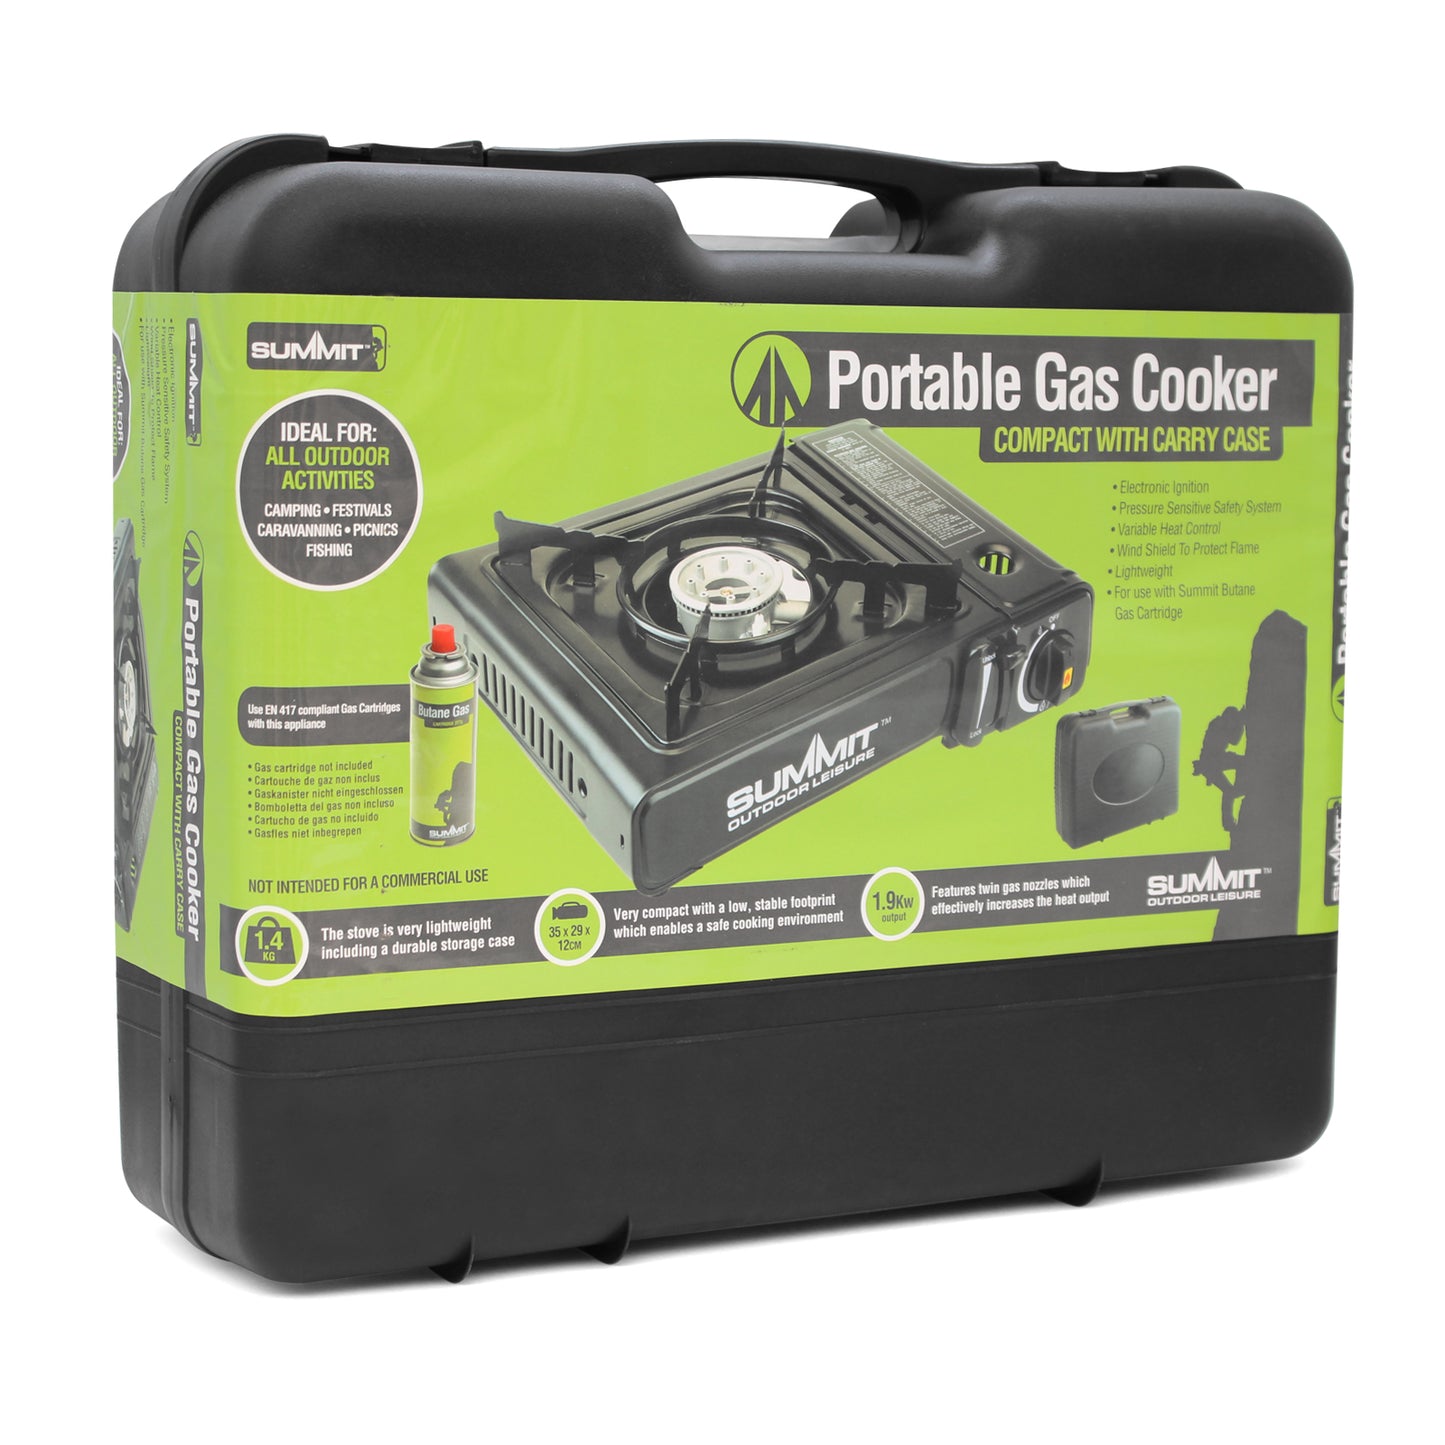 Portable Gas Cooker in Carry Case